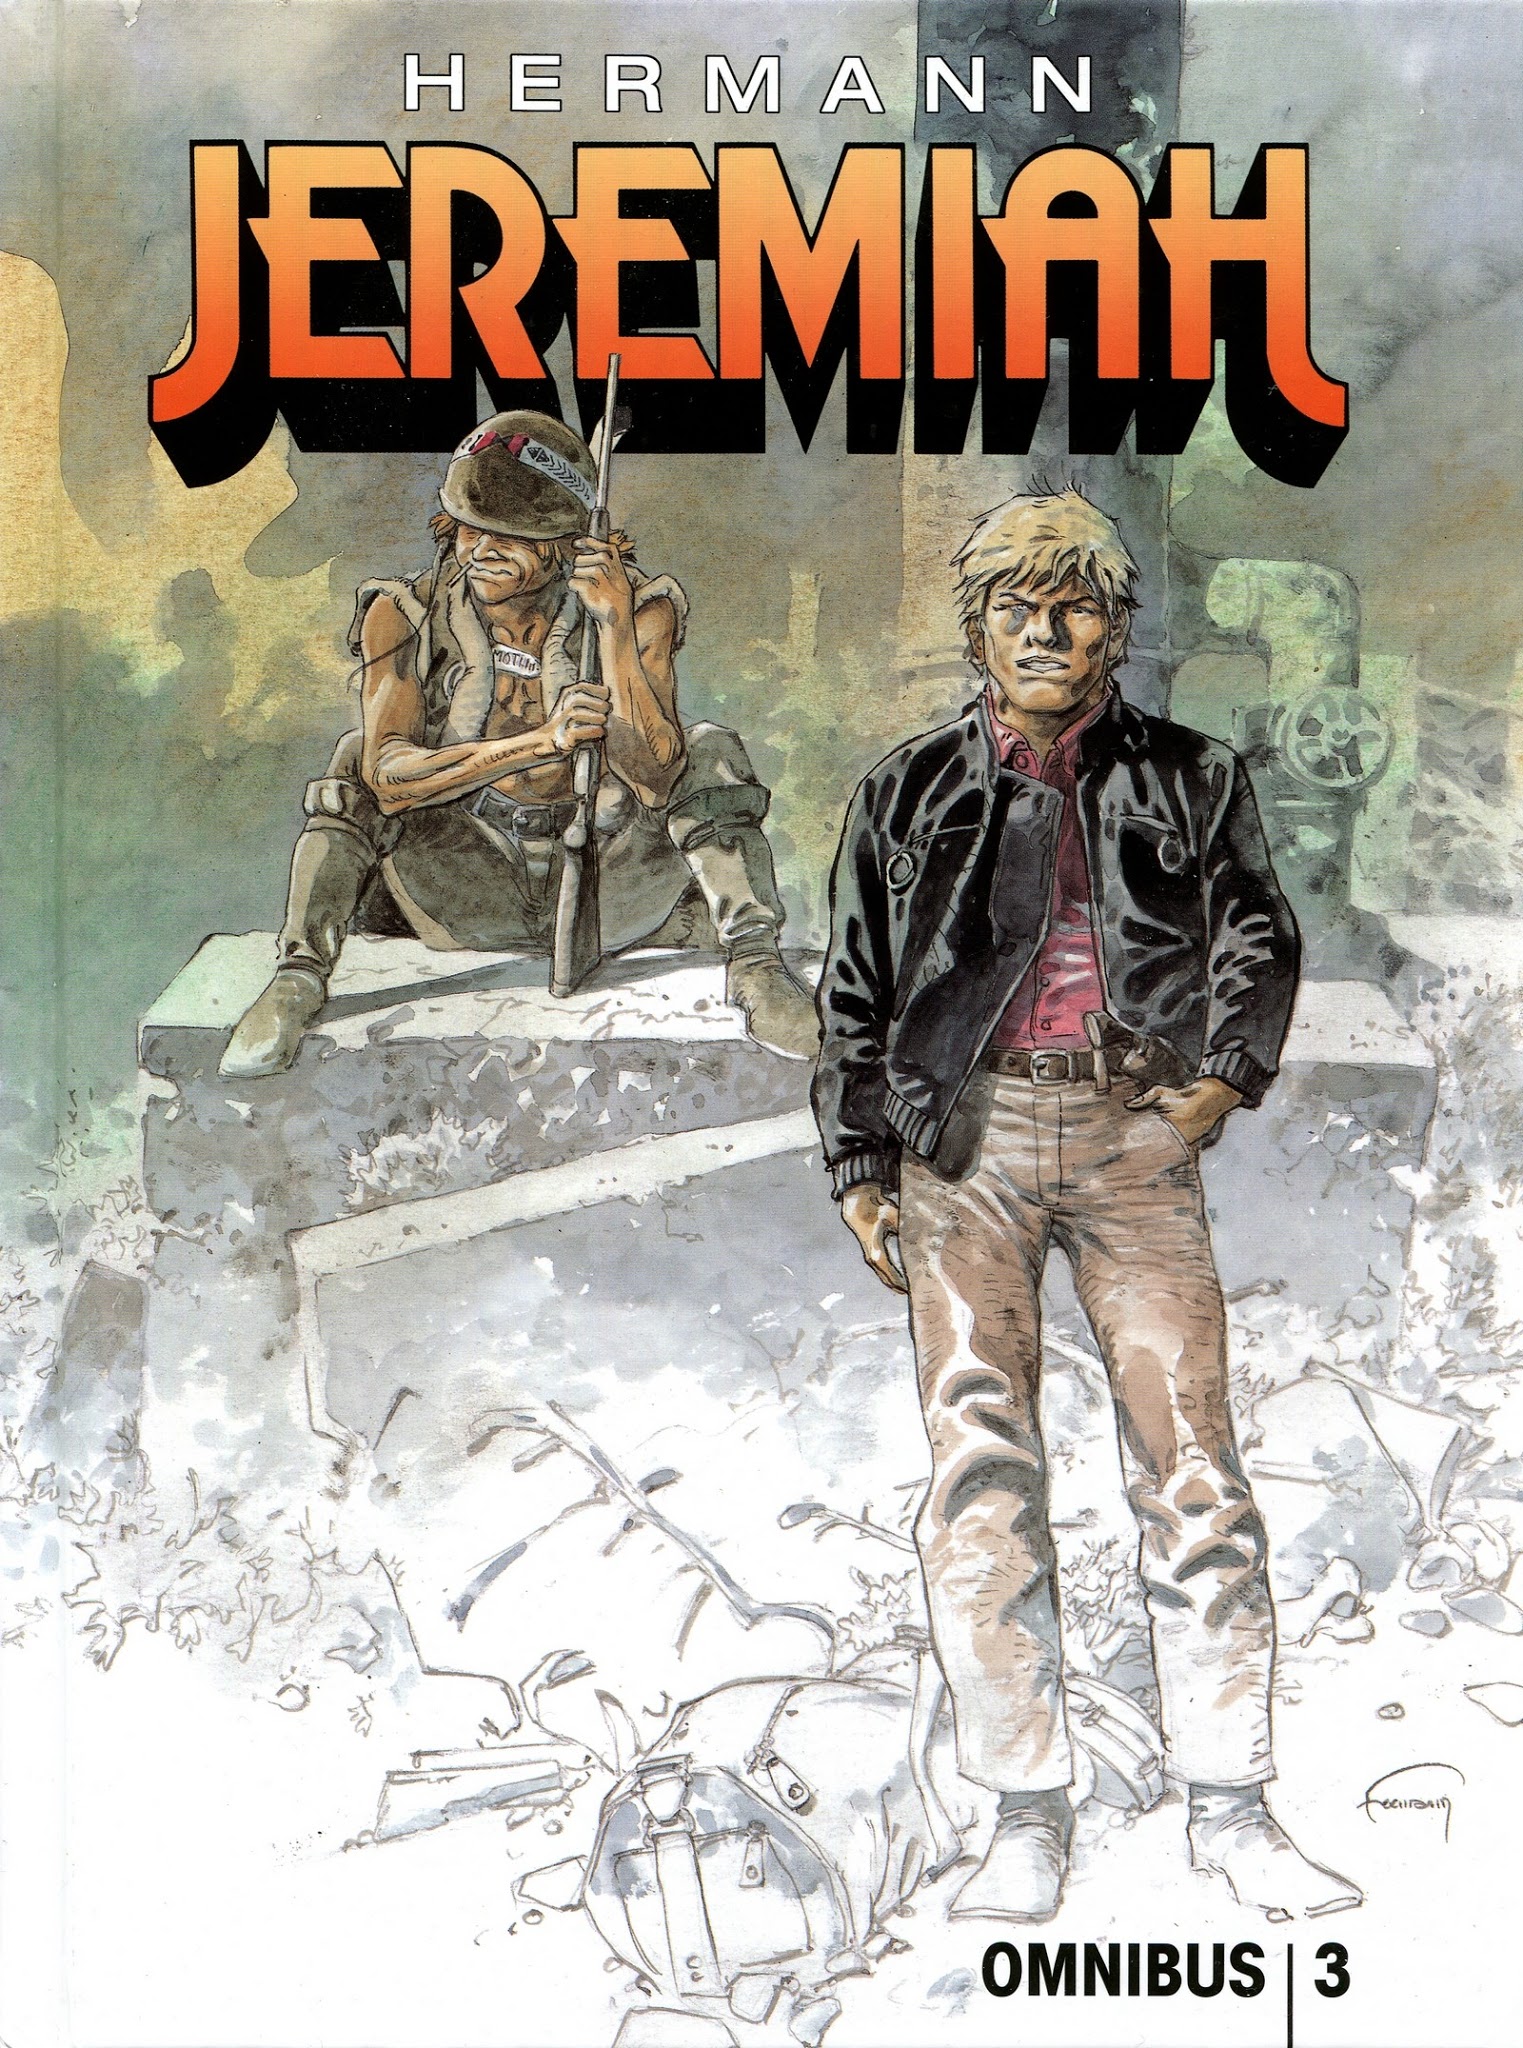 Read online Jeremiah by Hermann comic -  Issue # TPB 3 - 1